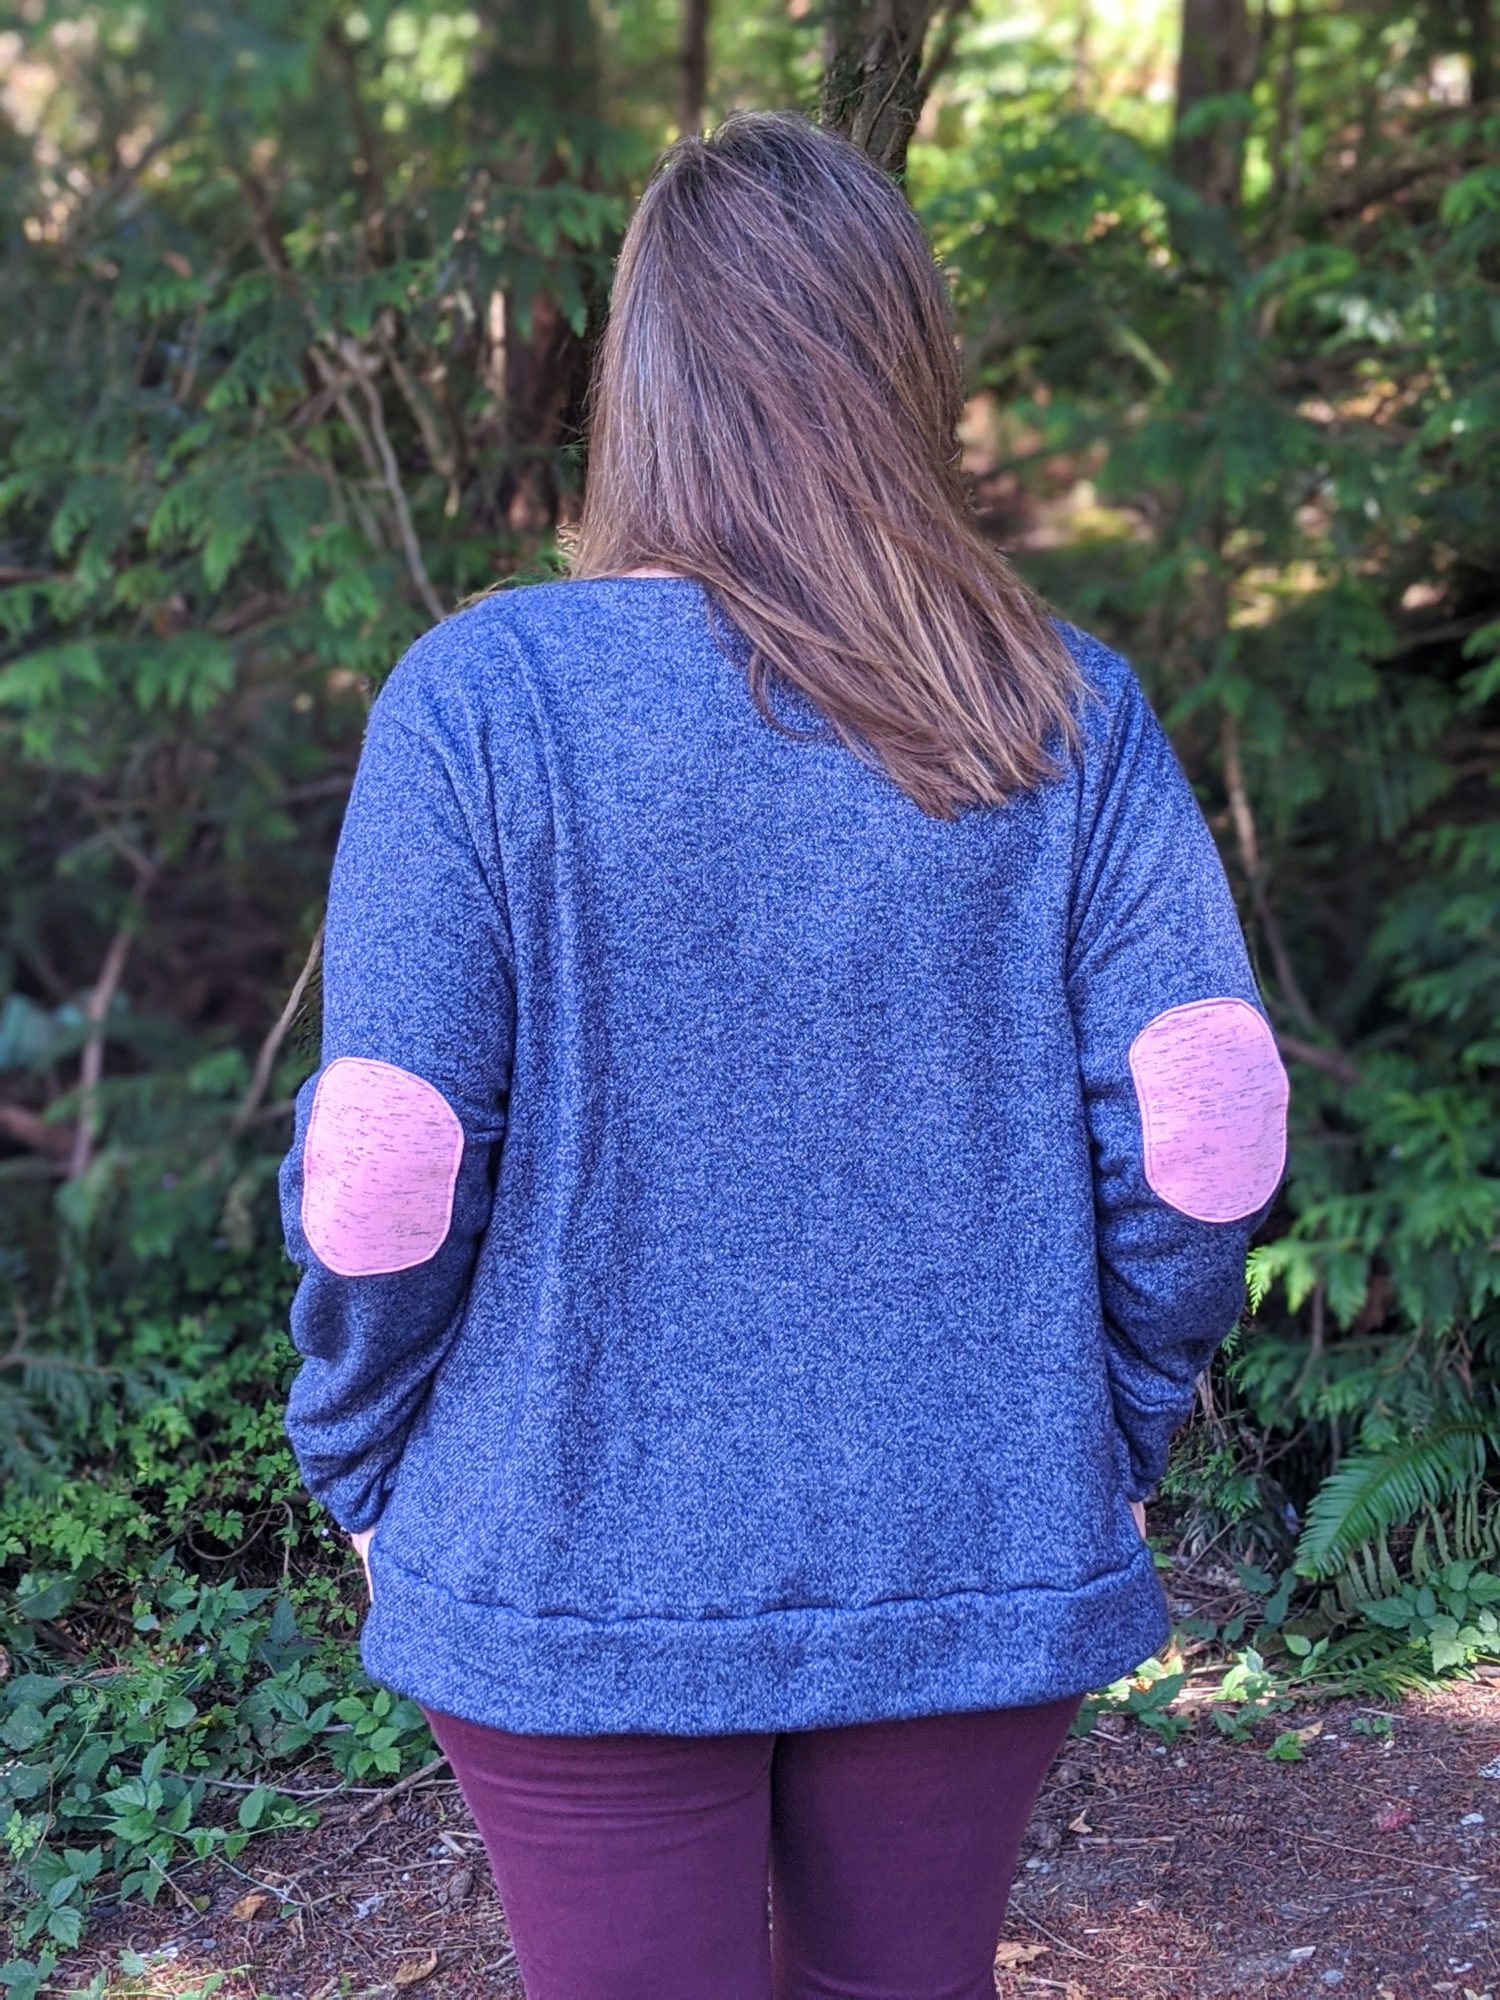 Easy Way to Add Elbow Patches to Your Wardrobe